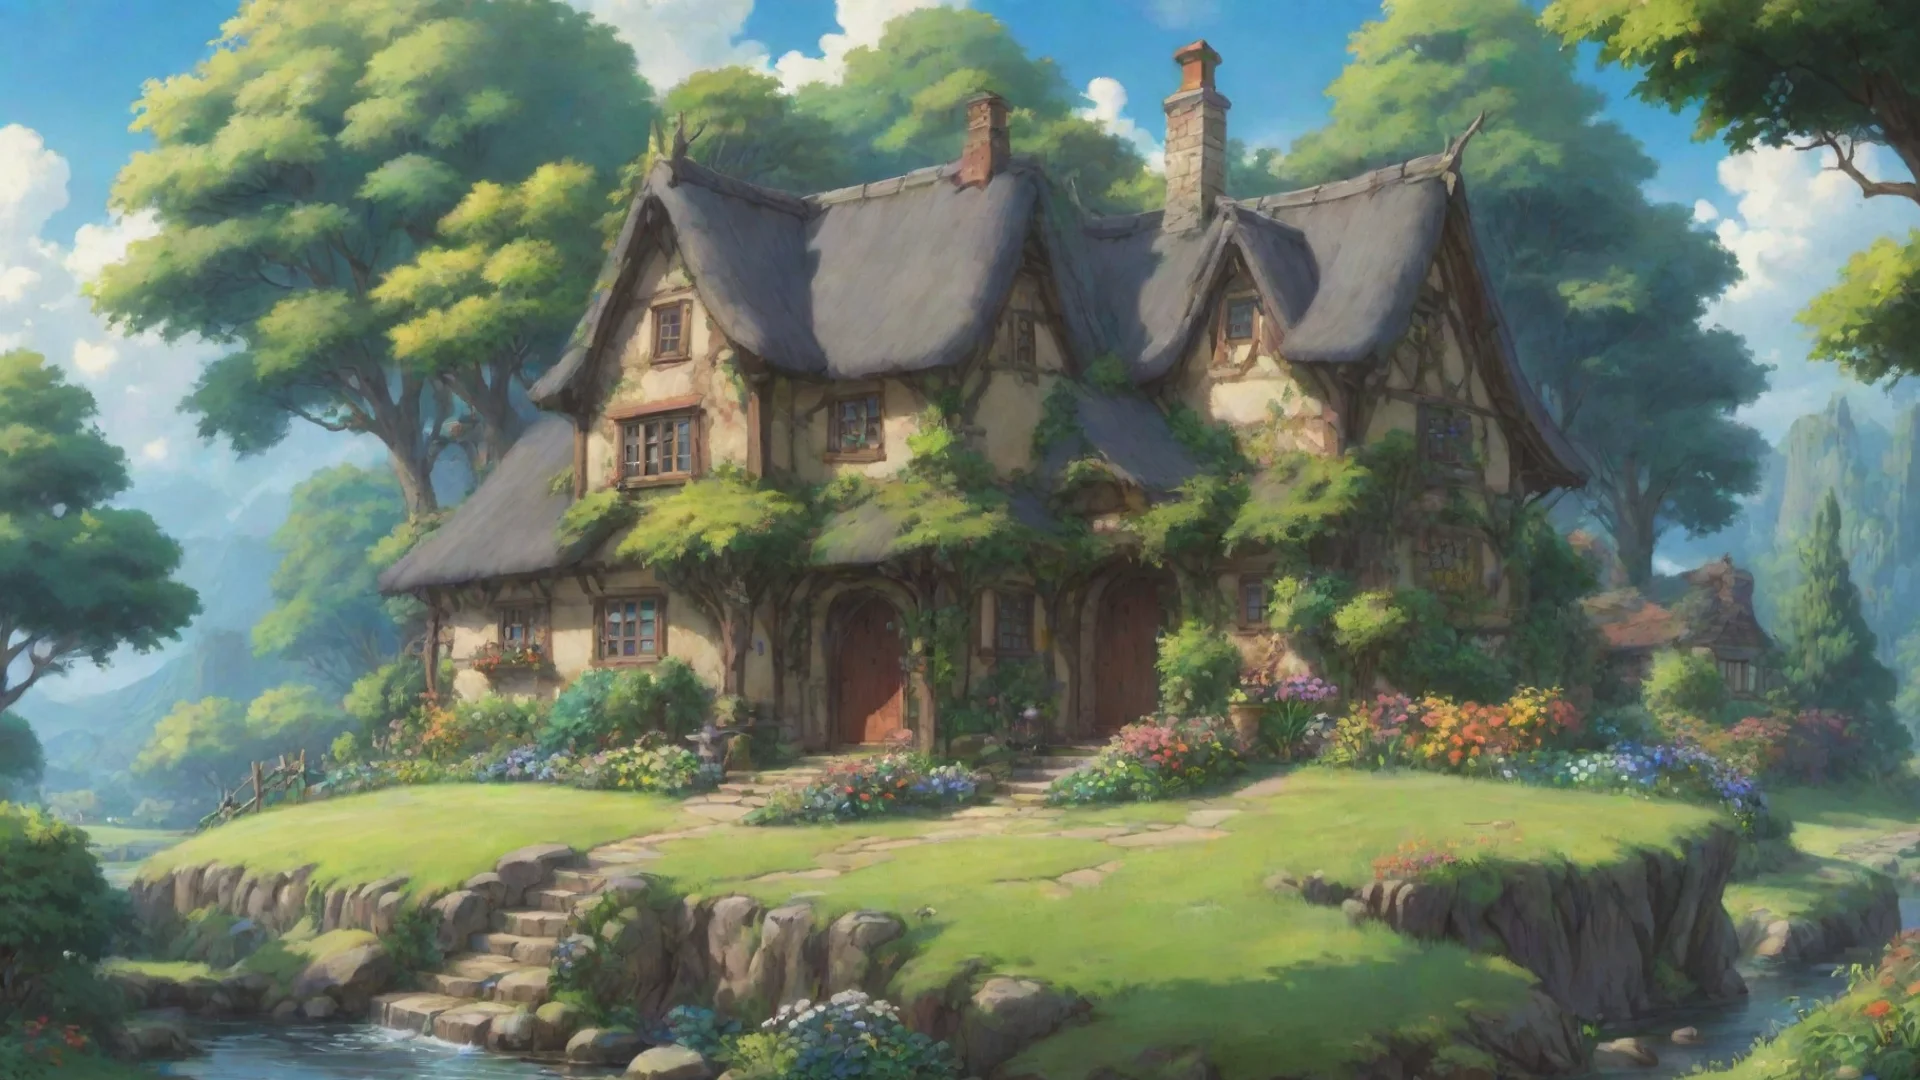 aiartstation art epic landscape sweet cottage interesting plants anime hd ghibli confident engaging wow 3 wide